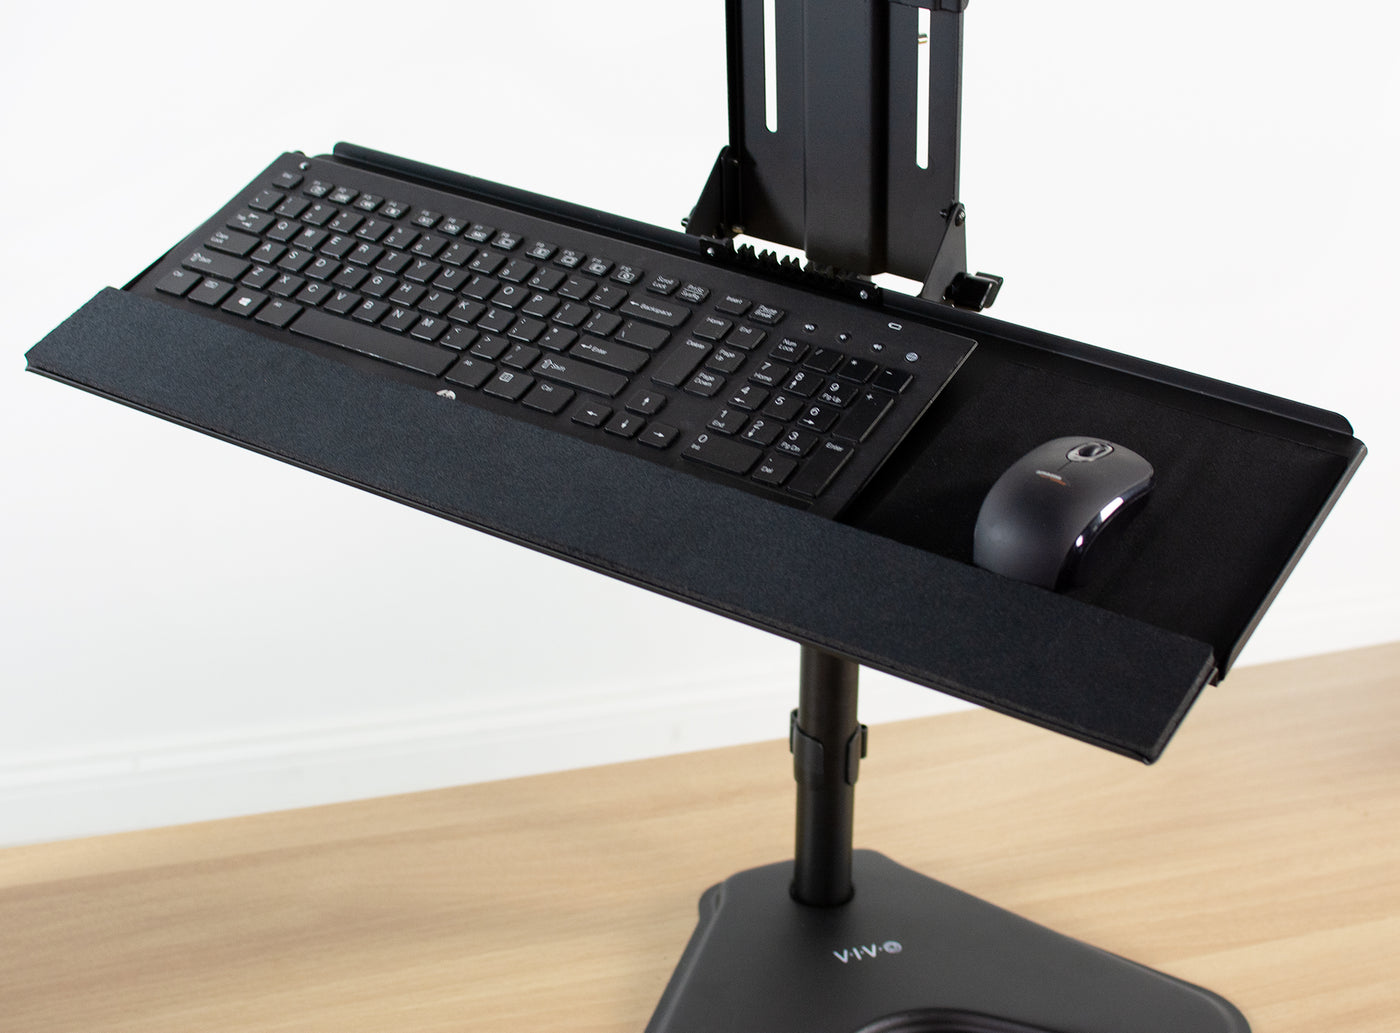 VESA attachable keyboard tray to modify your workspace.